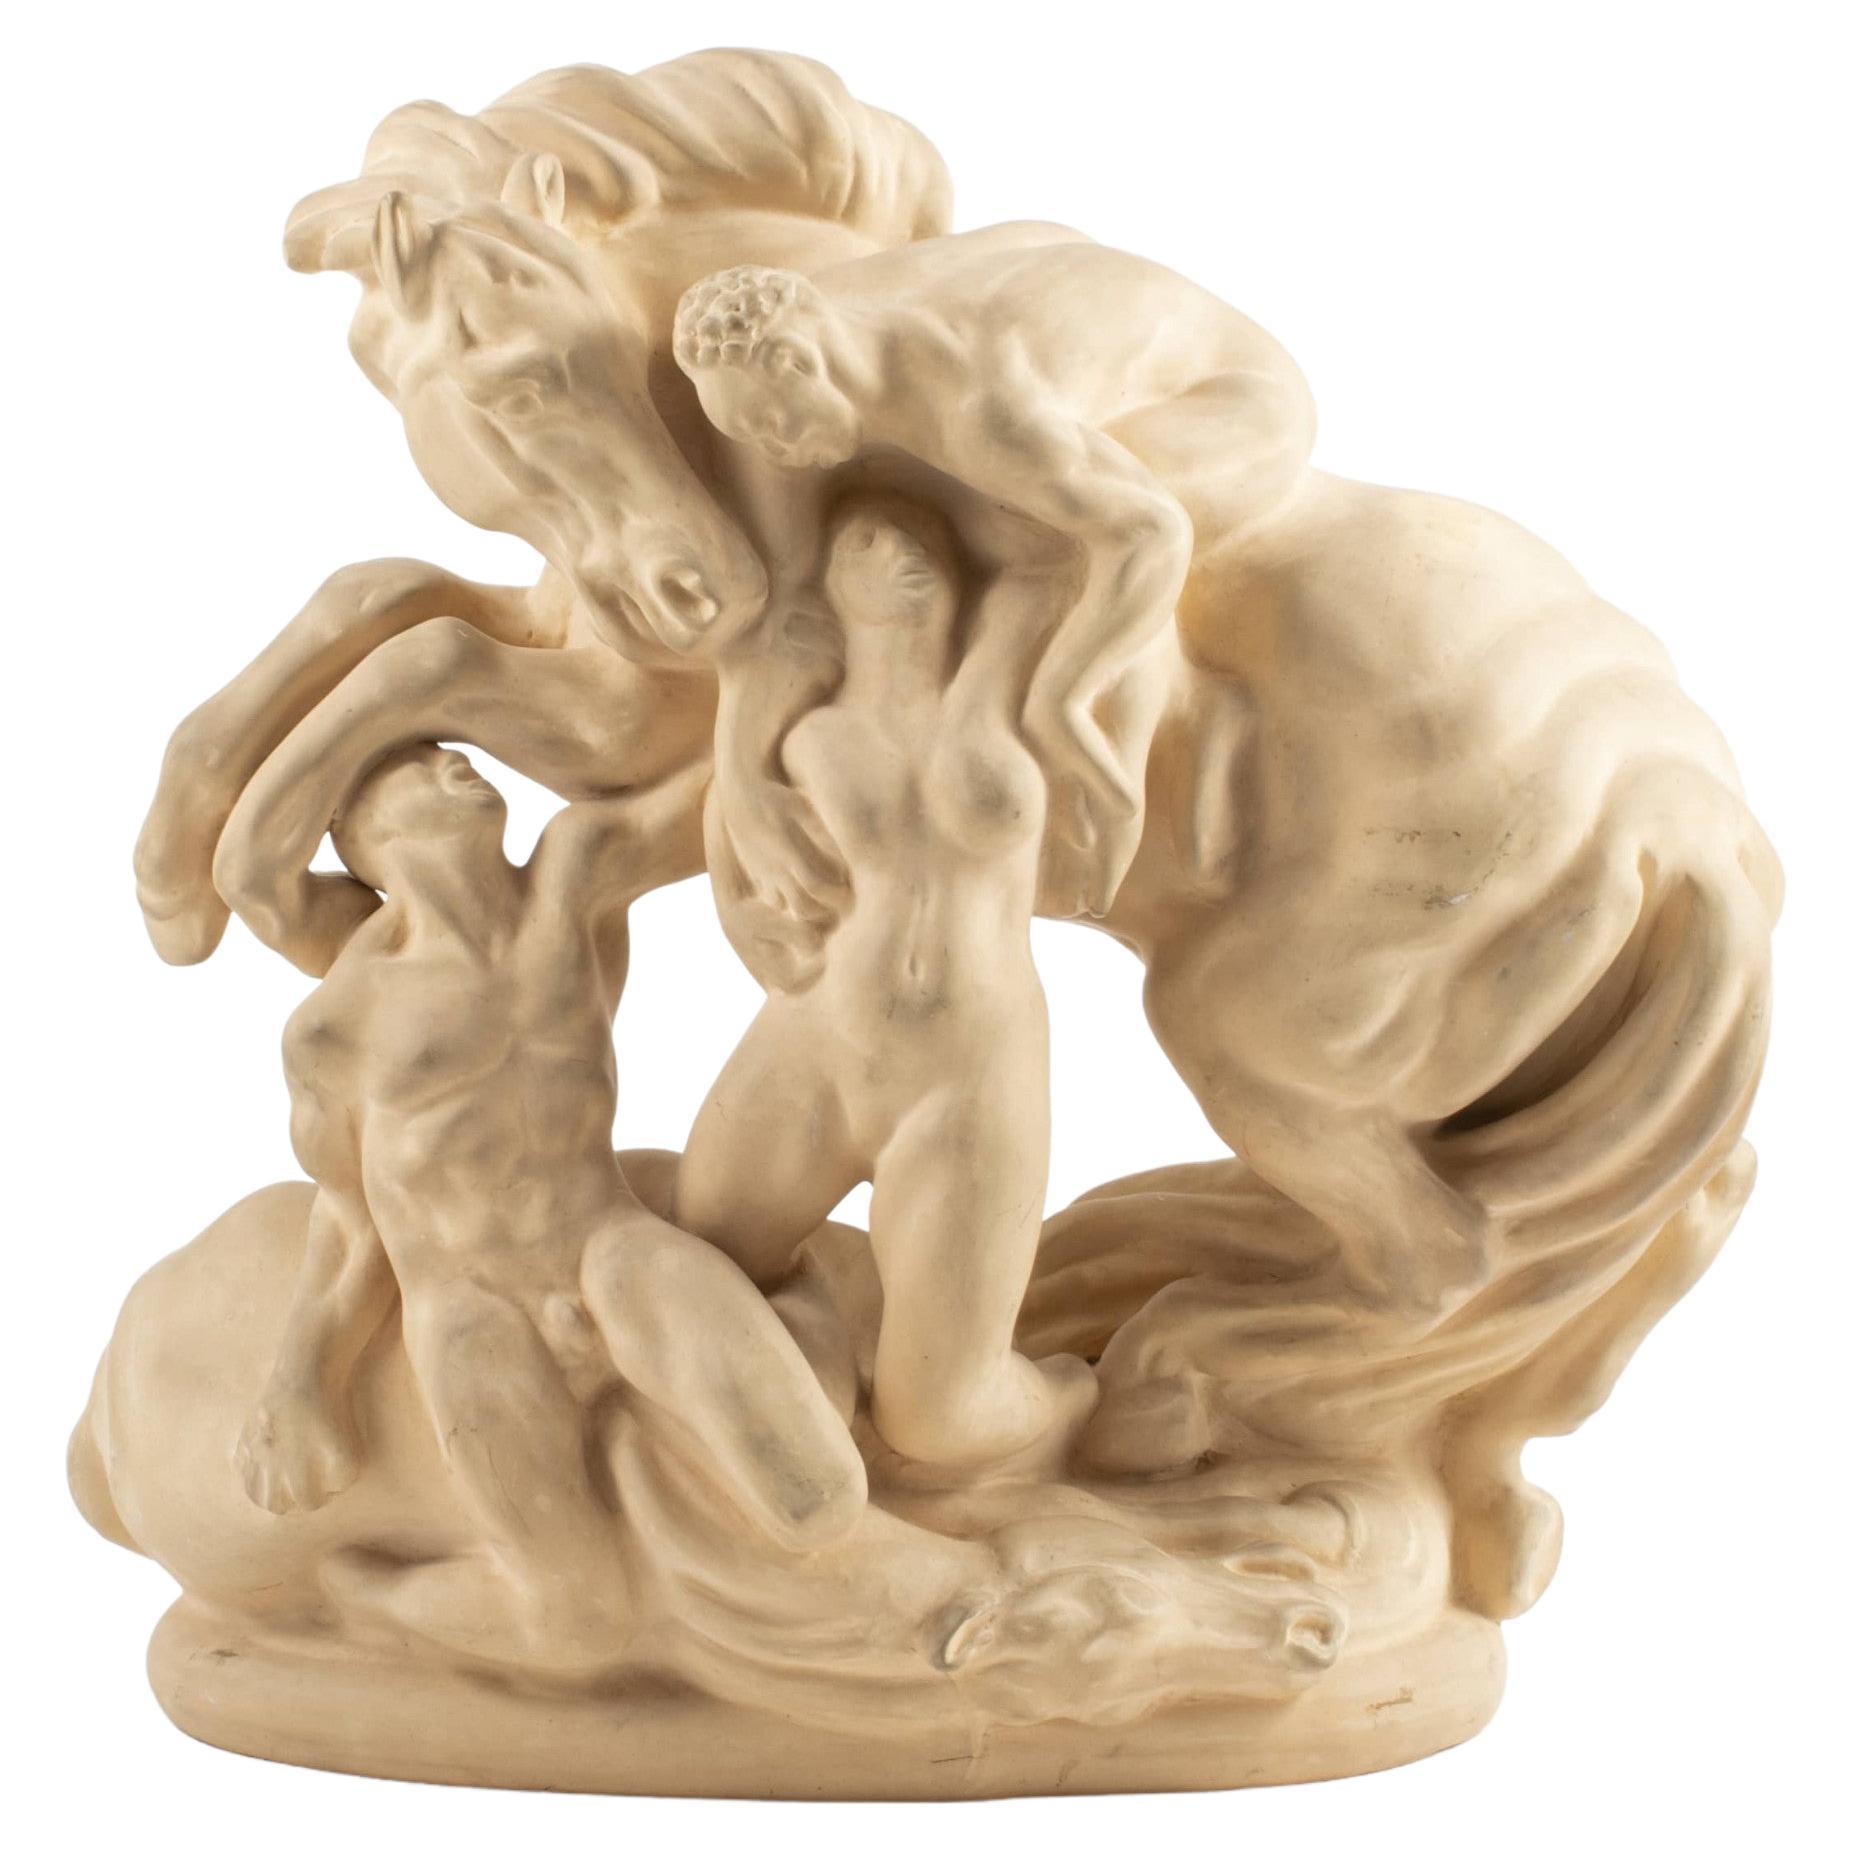 Kai Nielsen for Kähler, "The Abduction of the Sabine Women" Sculpture For Sale